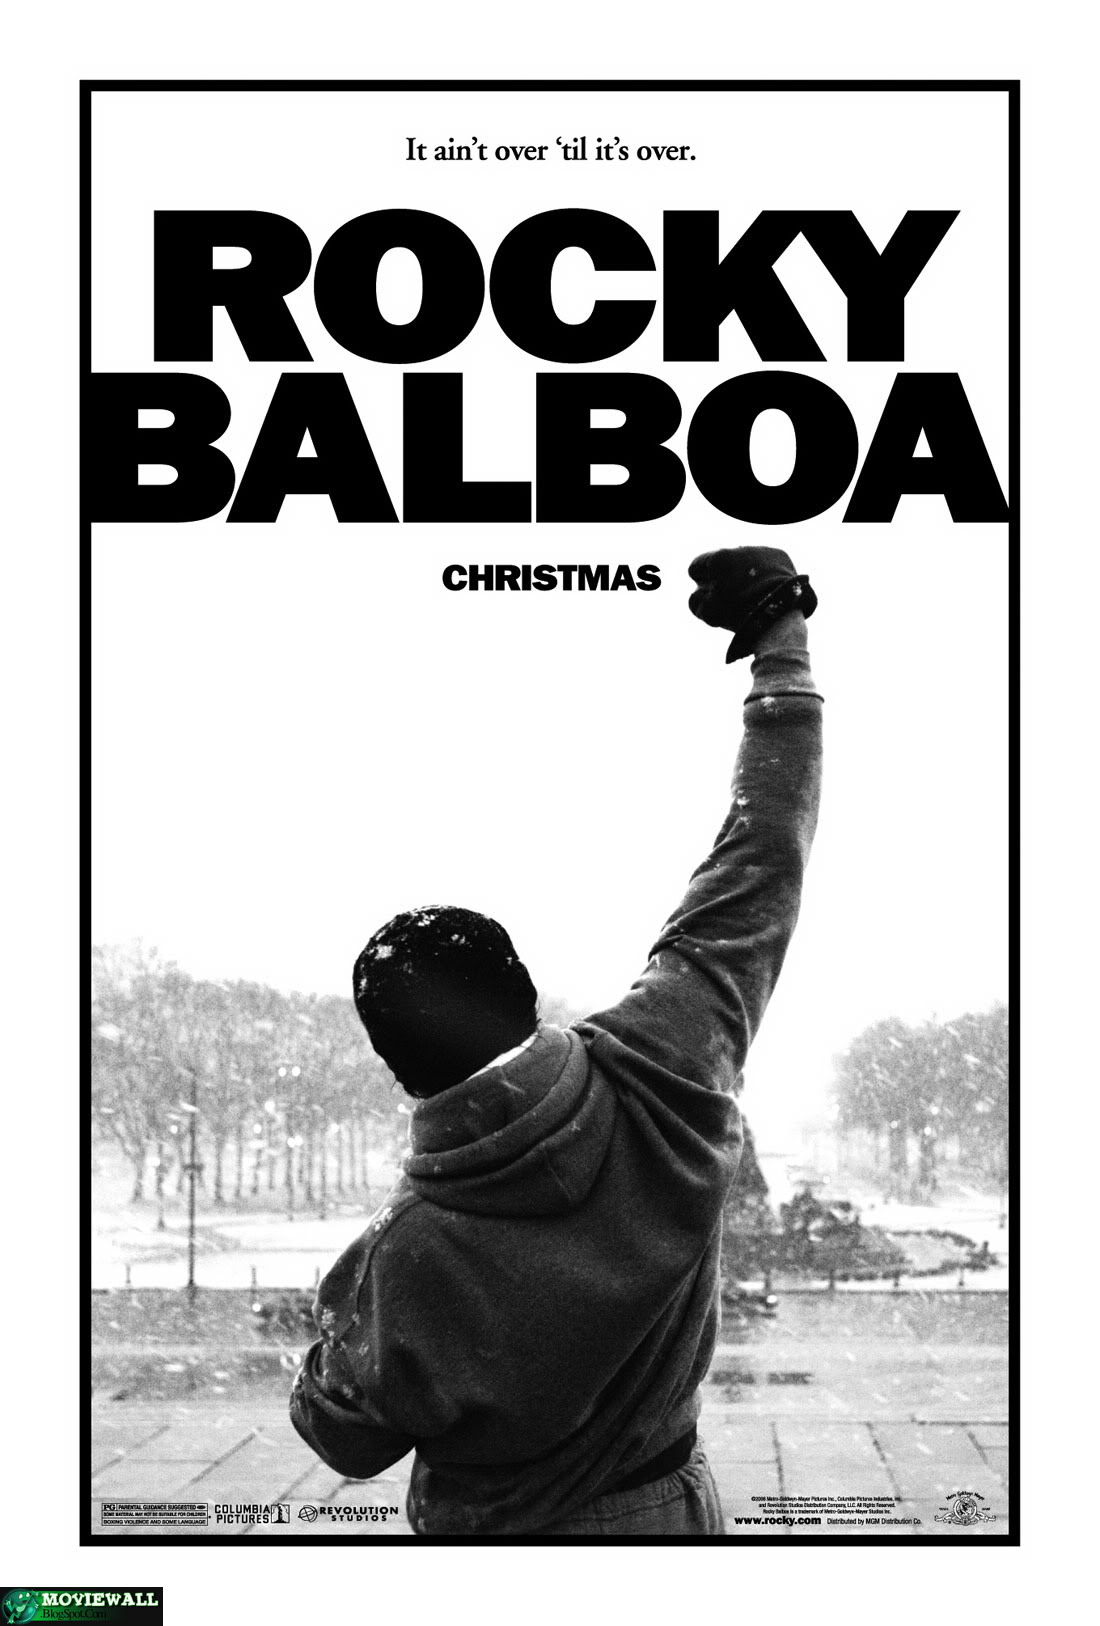 Moviewall - Movie Posters, Wallpapers & Trailers. Rocky Balboas